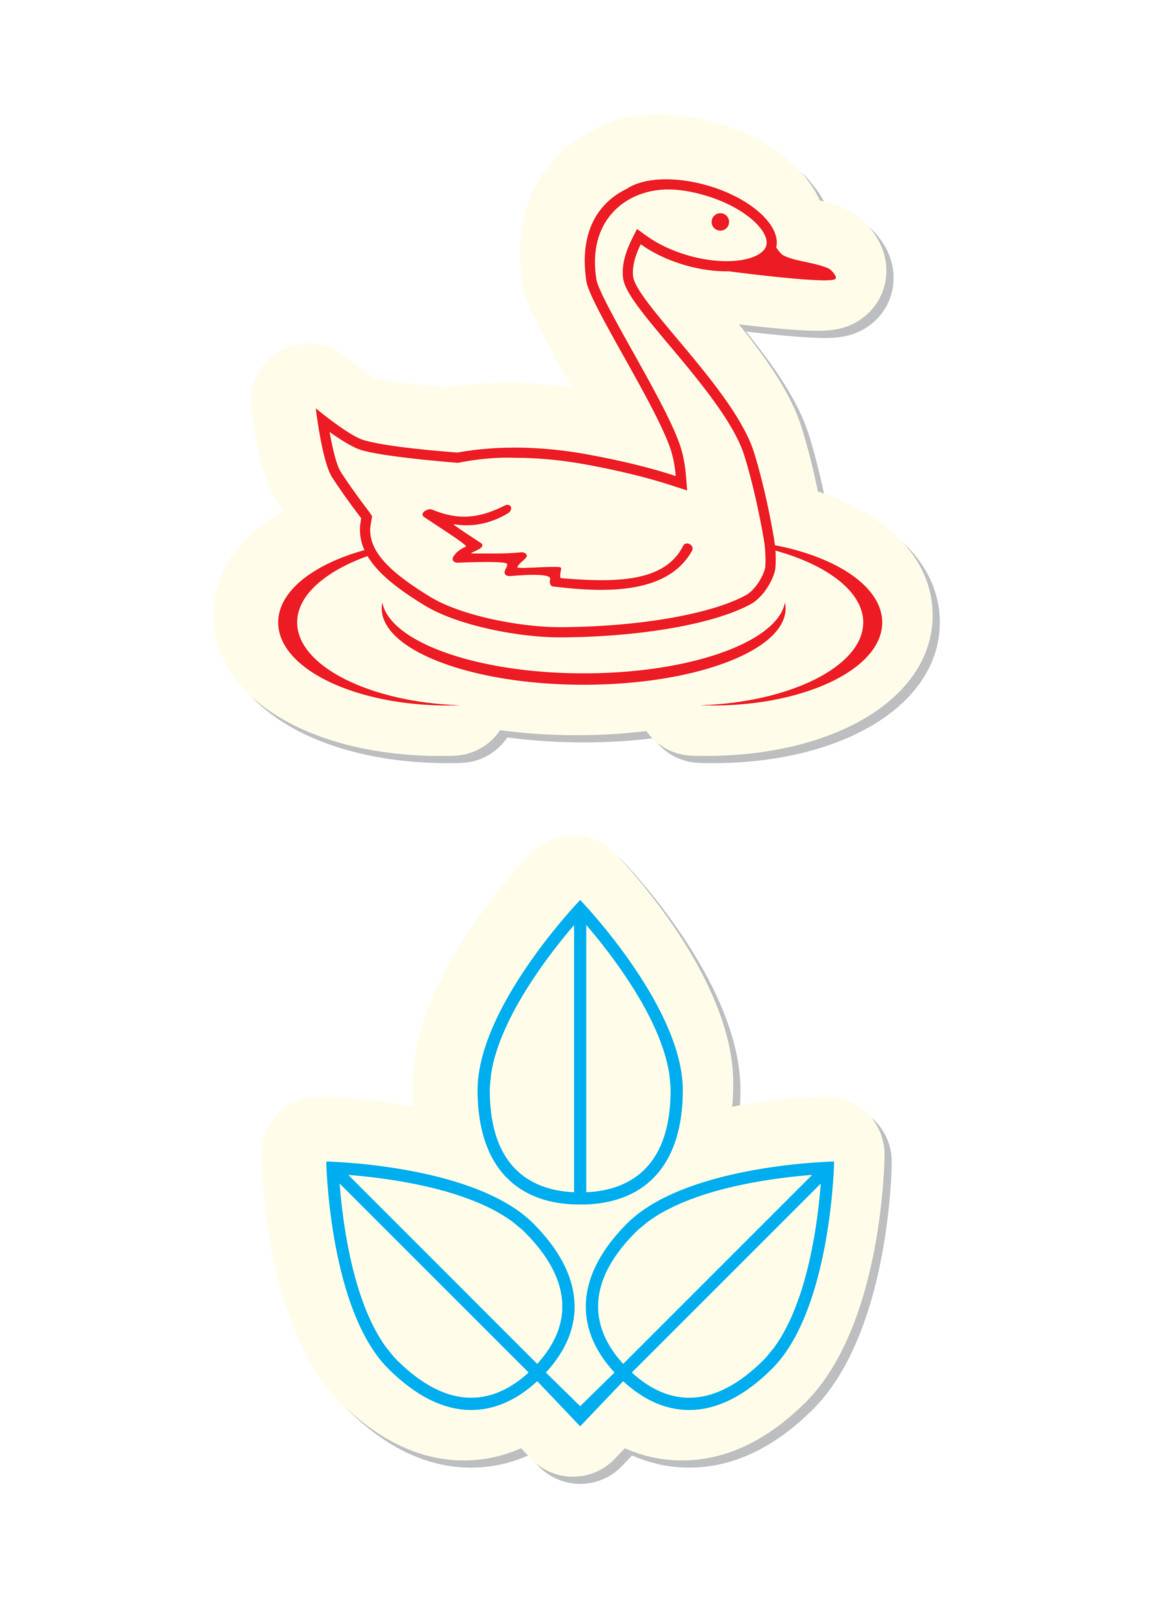 Swan and Leaf Icons Isolated on White